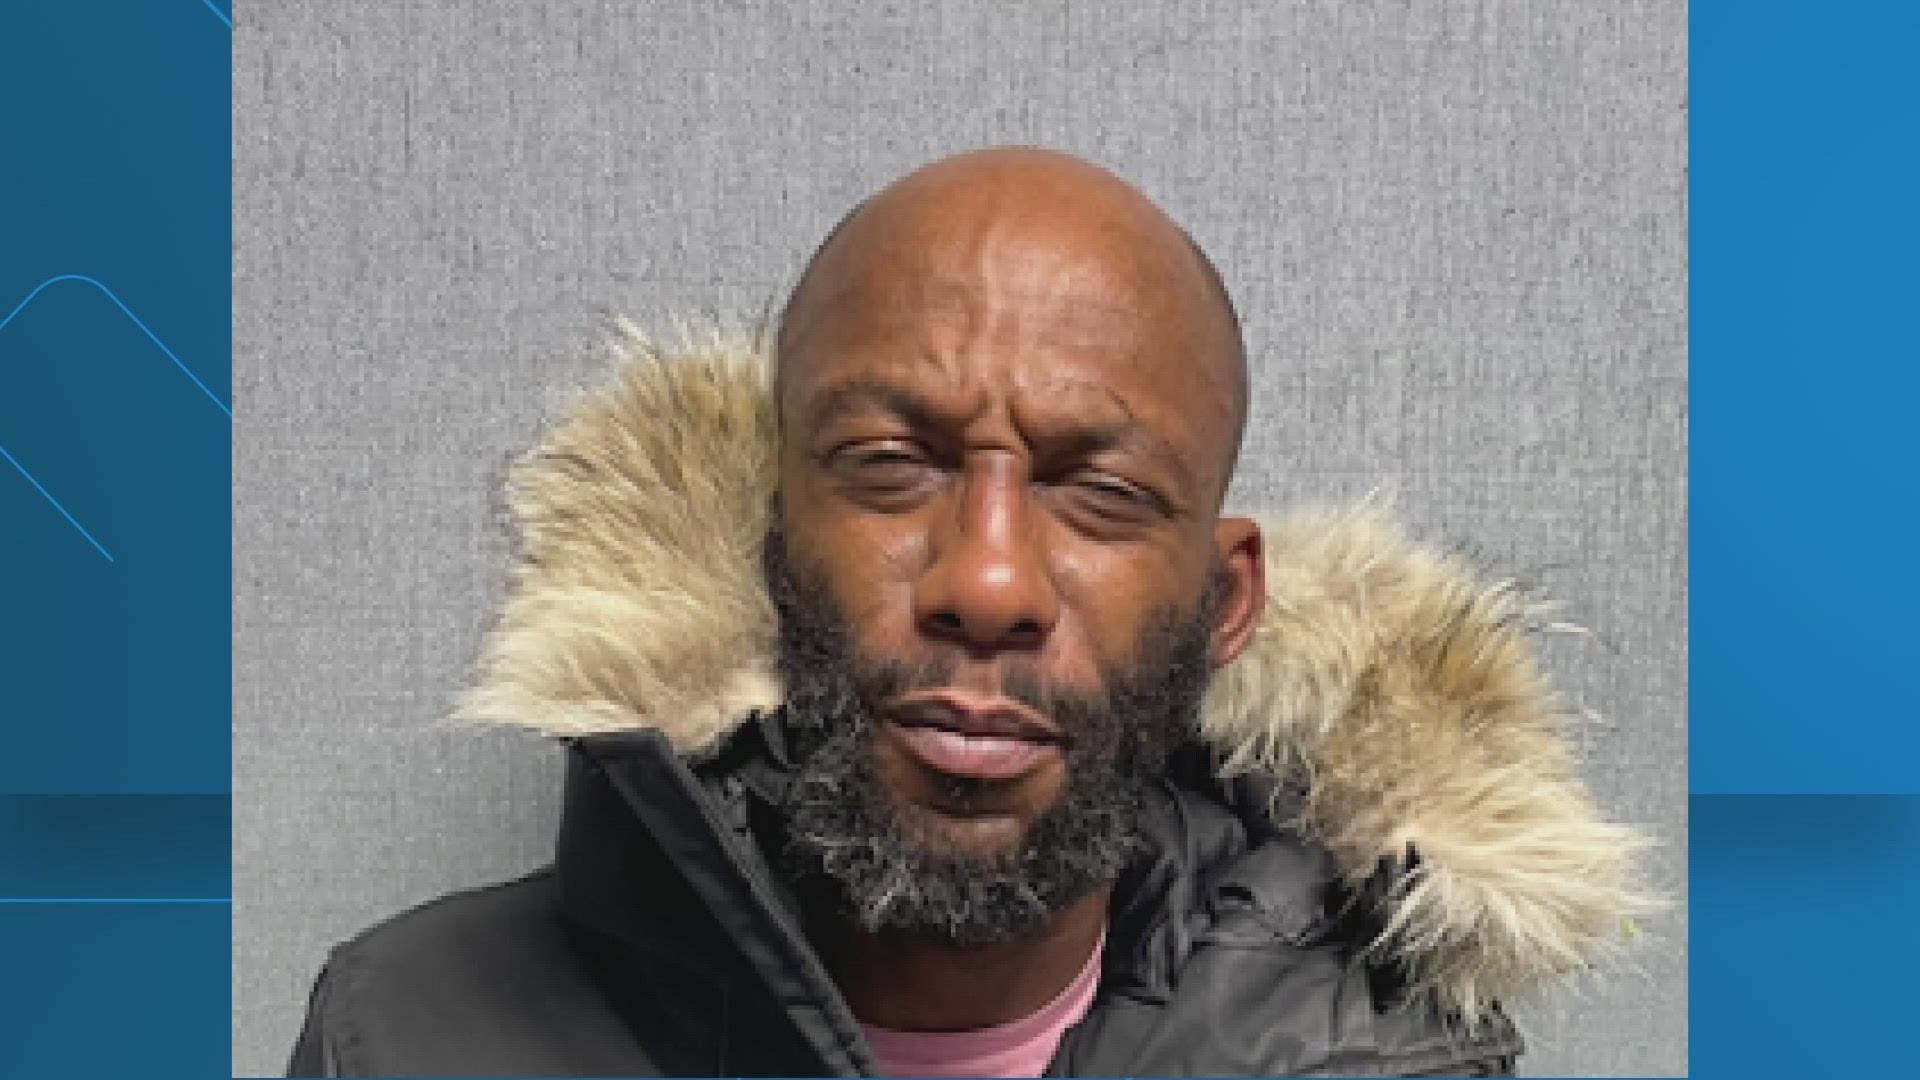 Police say they arrested Anthony Stevens for the murder of a convenience store owner. Officer say Stevens went to the store on Larchmont Avenue in Capitol Heights.